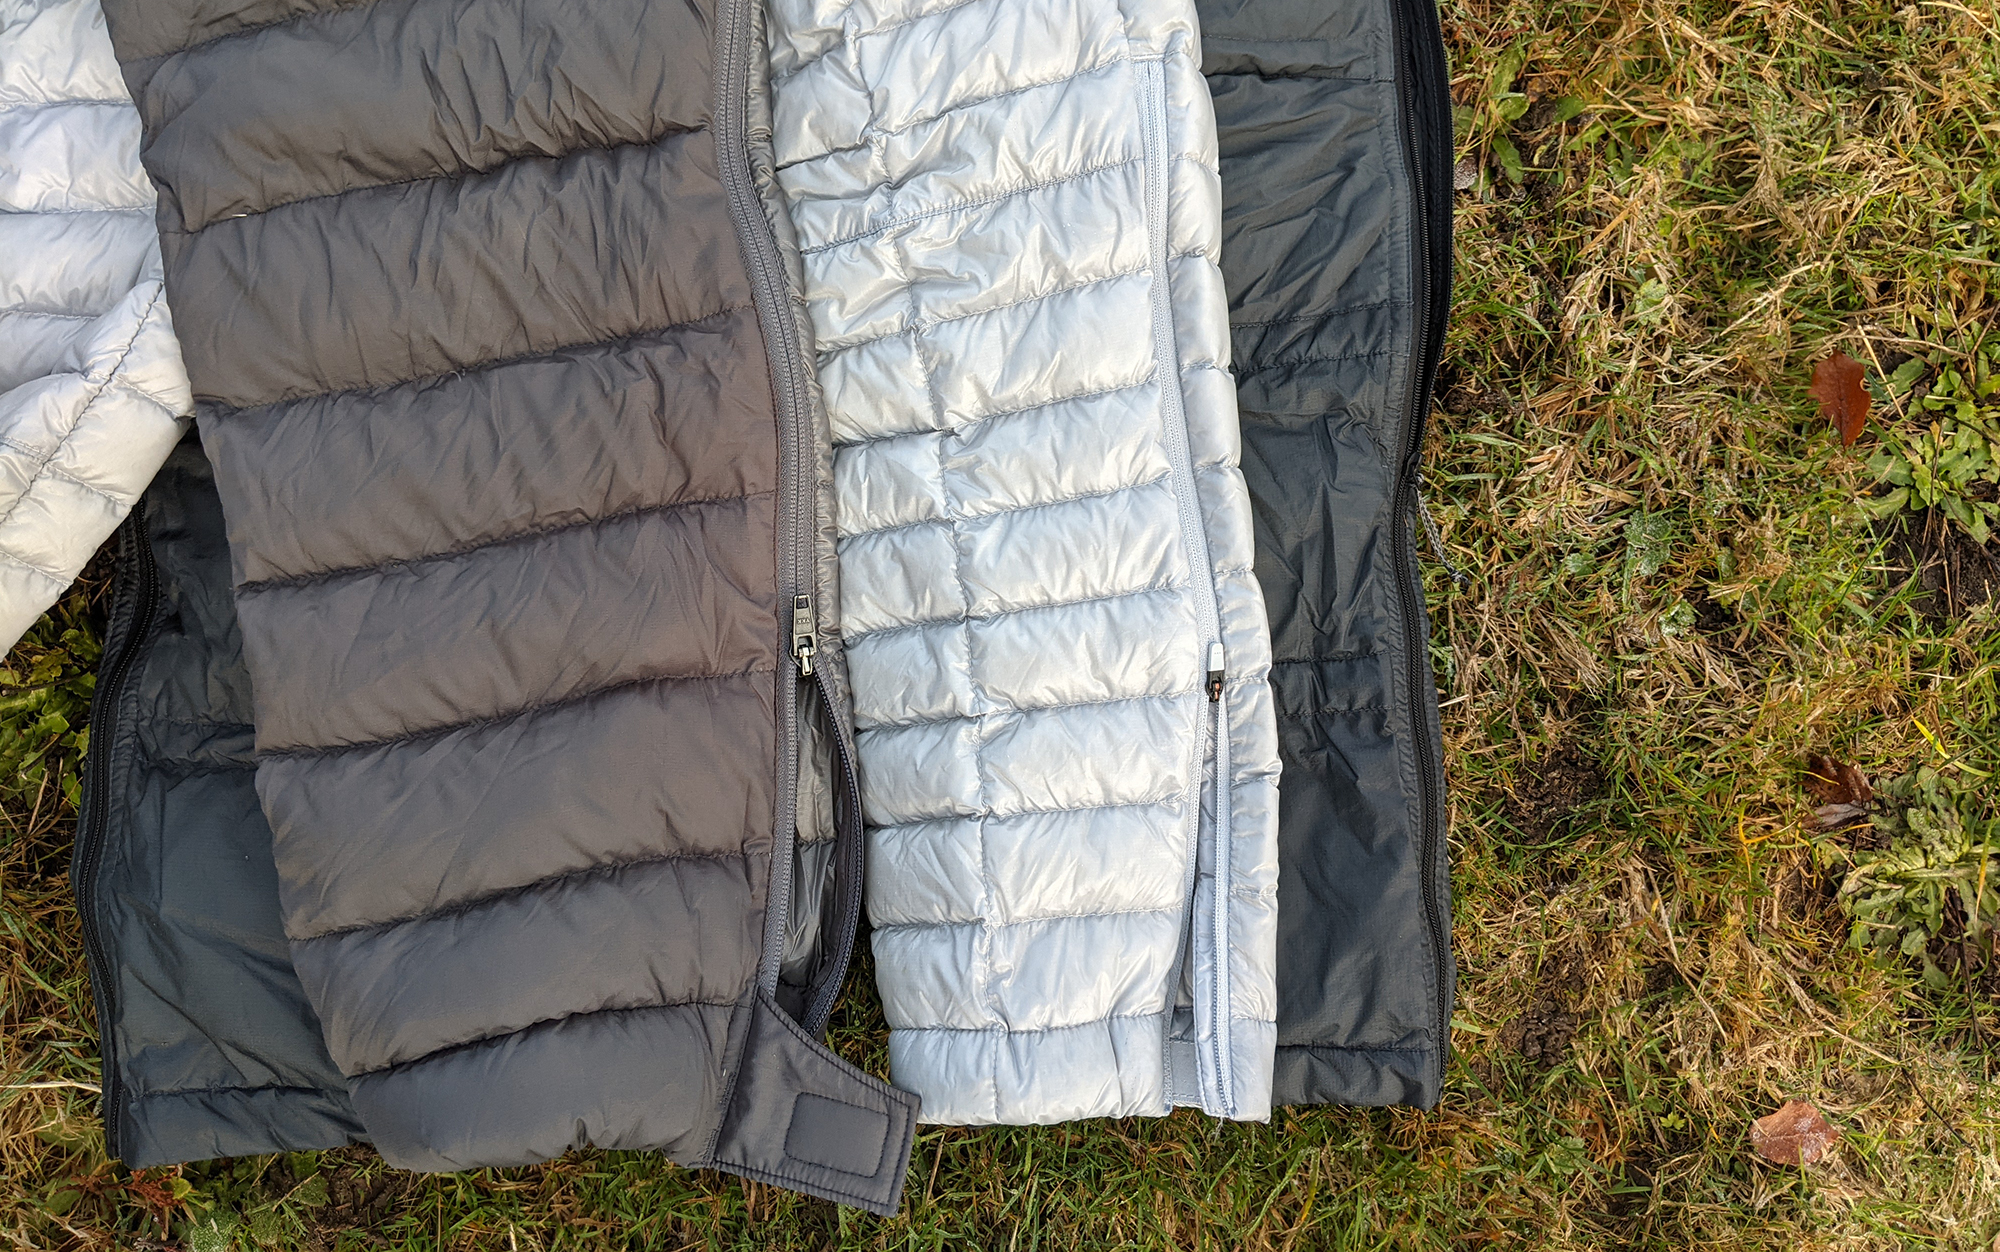 The Stone Glacier Grumman (left) had a two-way side zip, which made it easier to take off than either the Mountain Hardwear Ghost Whisperer Pant (center), which had a zip that ran from the hem up to the mid-calf or the KUIU Super Down ULTRA Pant (right) which had a one-way zip that runs down from the waist. 